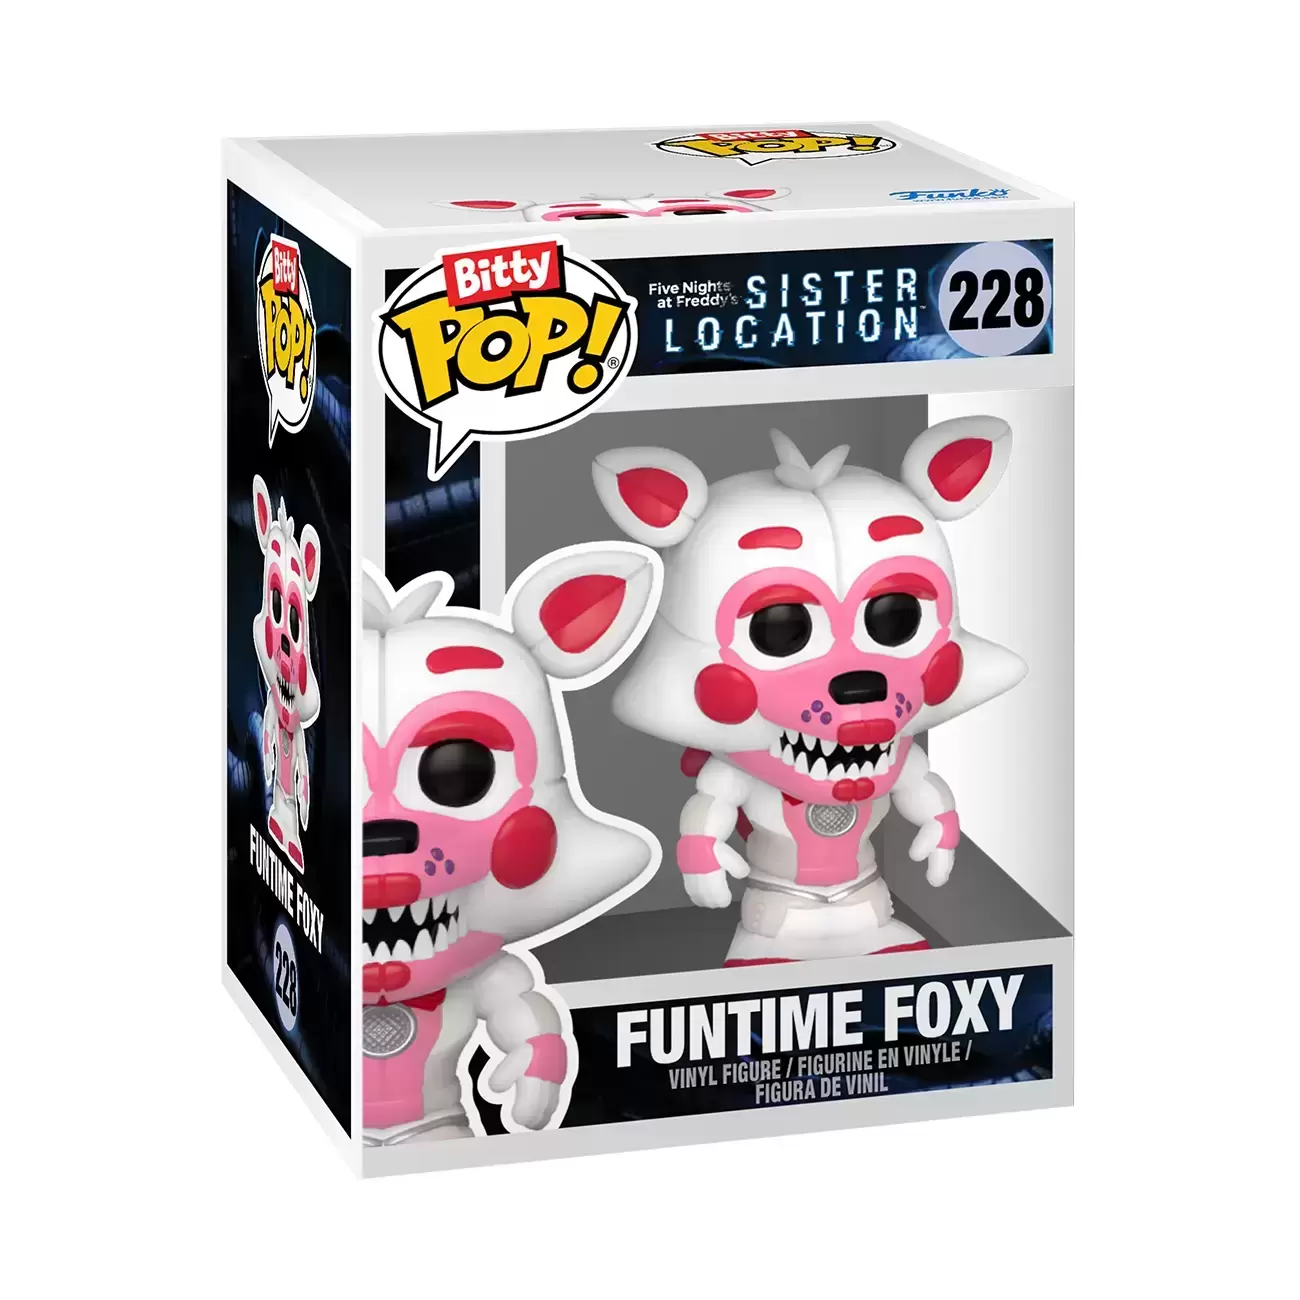 Five Nights at Freddy's - Funtime Foxy - Bitty POP! action figure 228